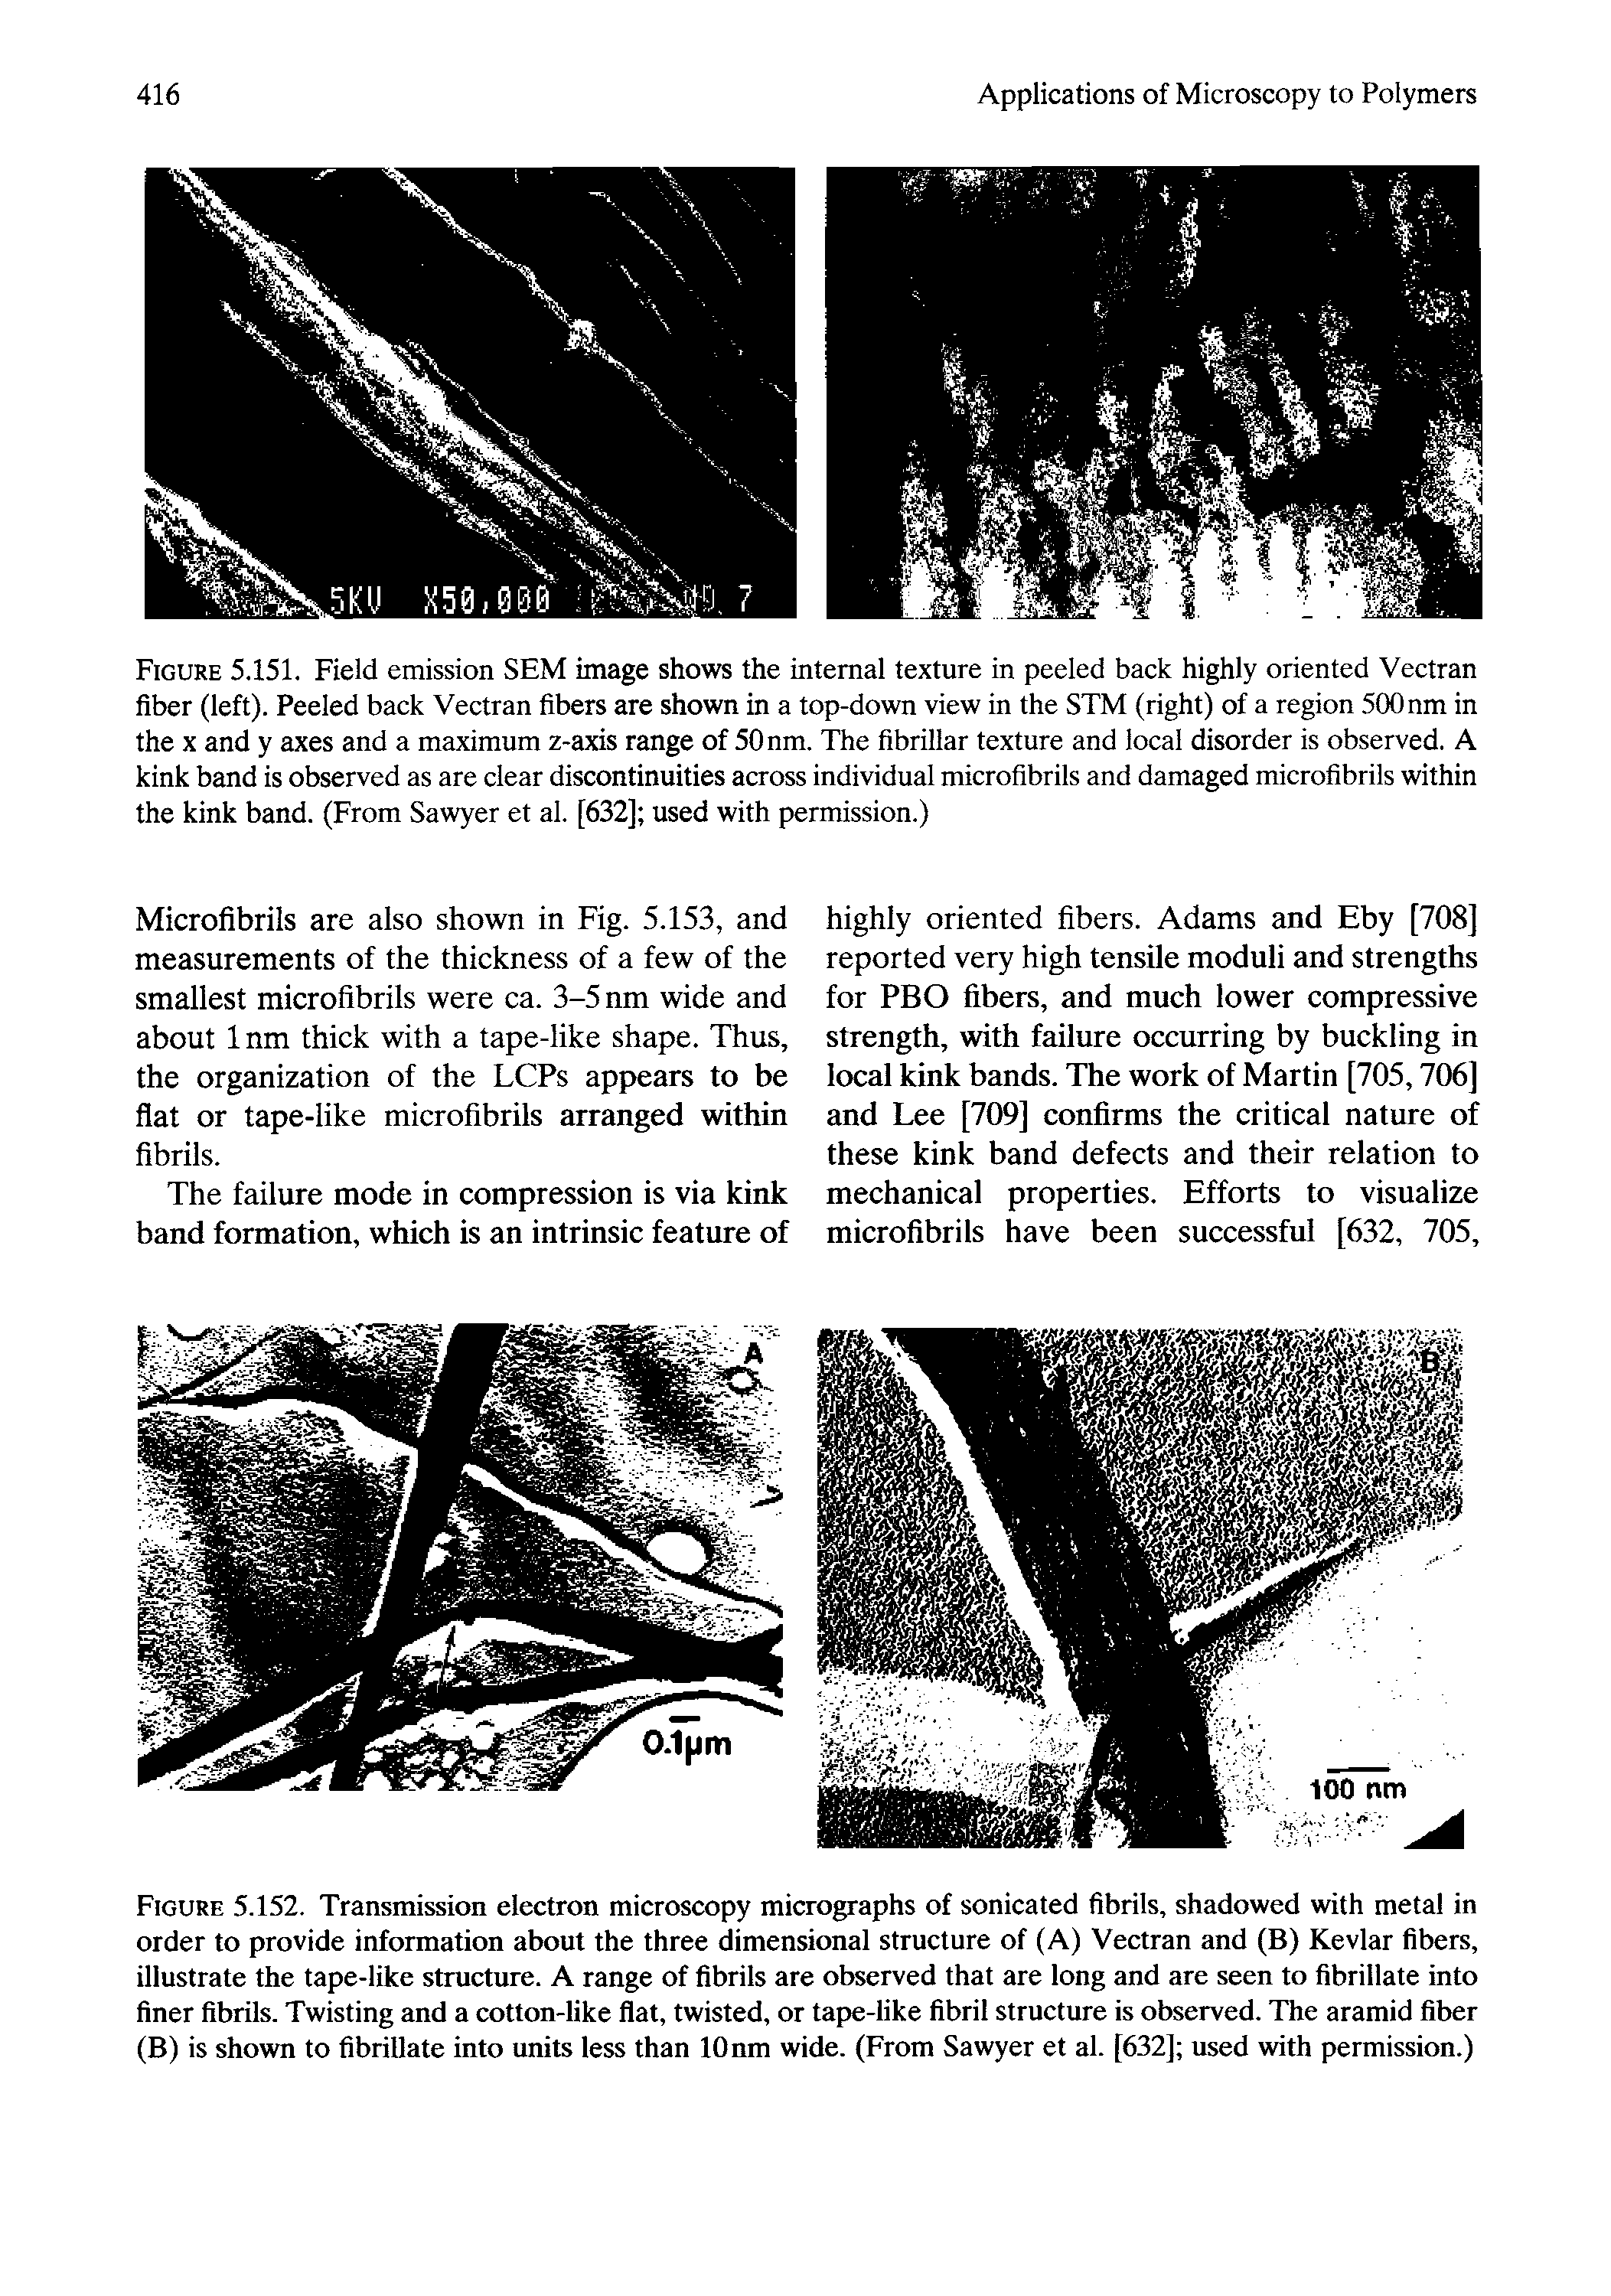 Figure 5.152. Transmission electron microscopy micrographs of sonicated fibrils, shadowed with metal in order to provide information about the three dimensional structure of (A) Vectran and (B) Kevlar fibers, illustrate the tape-like structure. A range of fibrils are observed that are long and are seen to fibrillate into finer fibrils. Twisting and a cotton-like flat, twisted, or tape-like fibril structure is observed. The aramid fiber (B) is shown to fibrillate into units less than 10 nm wide. (From Sawyer et al. [632] used with permission.)...